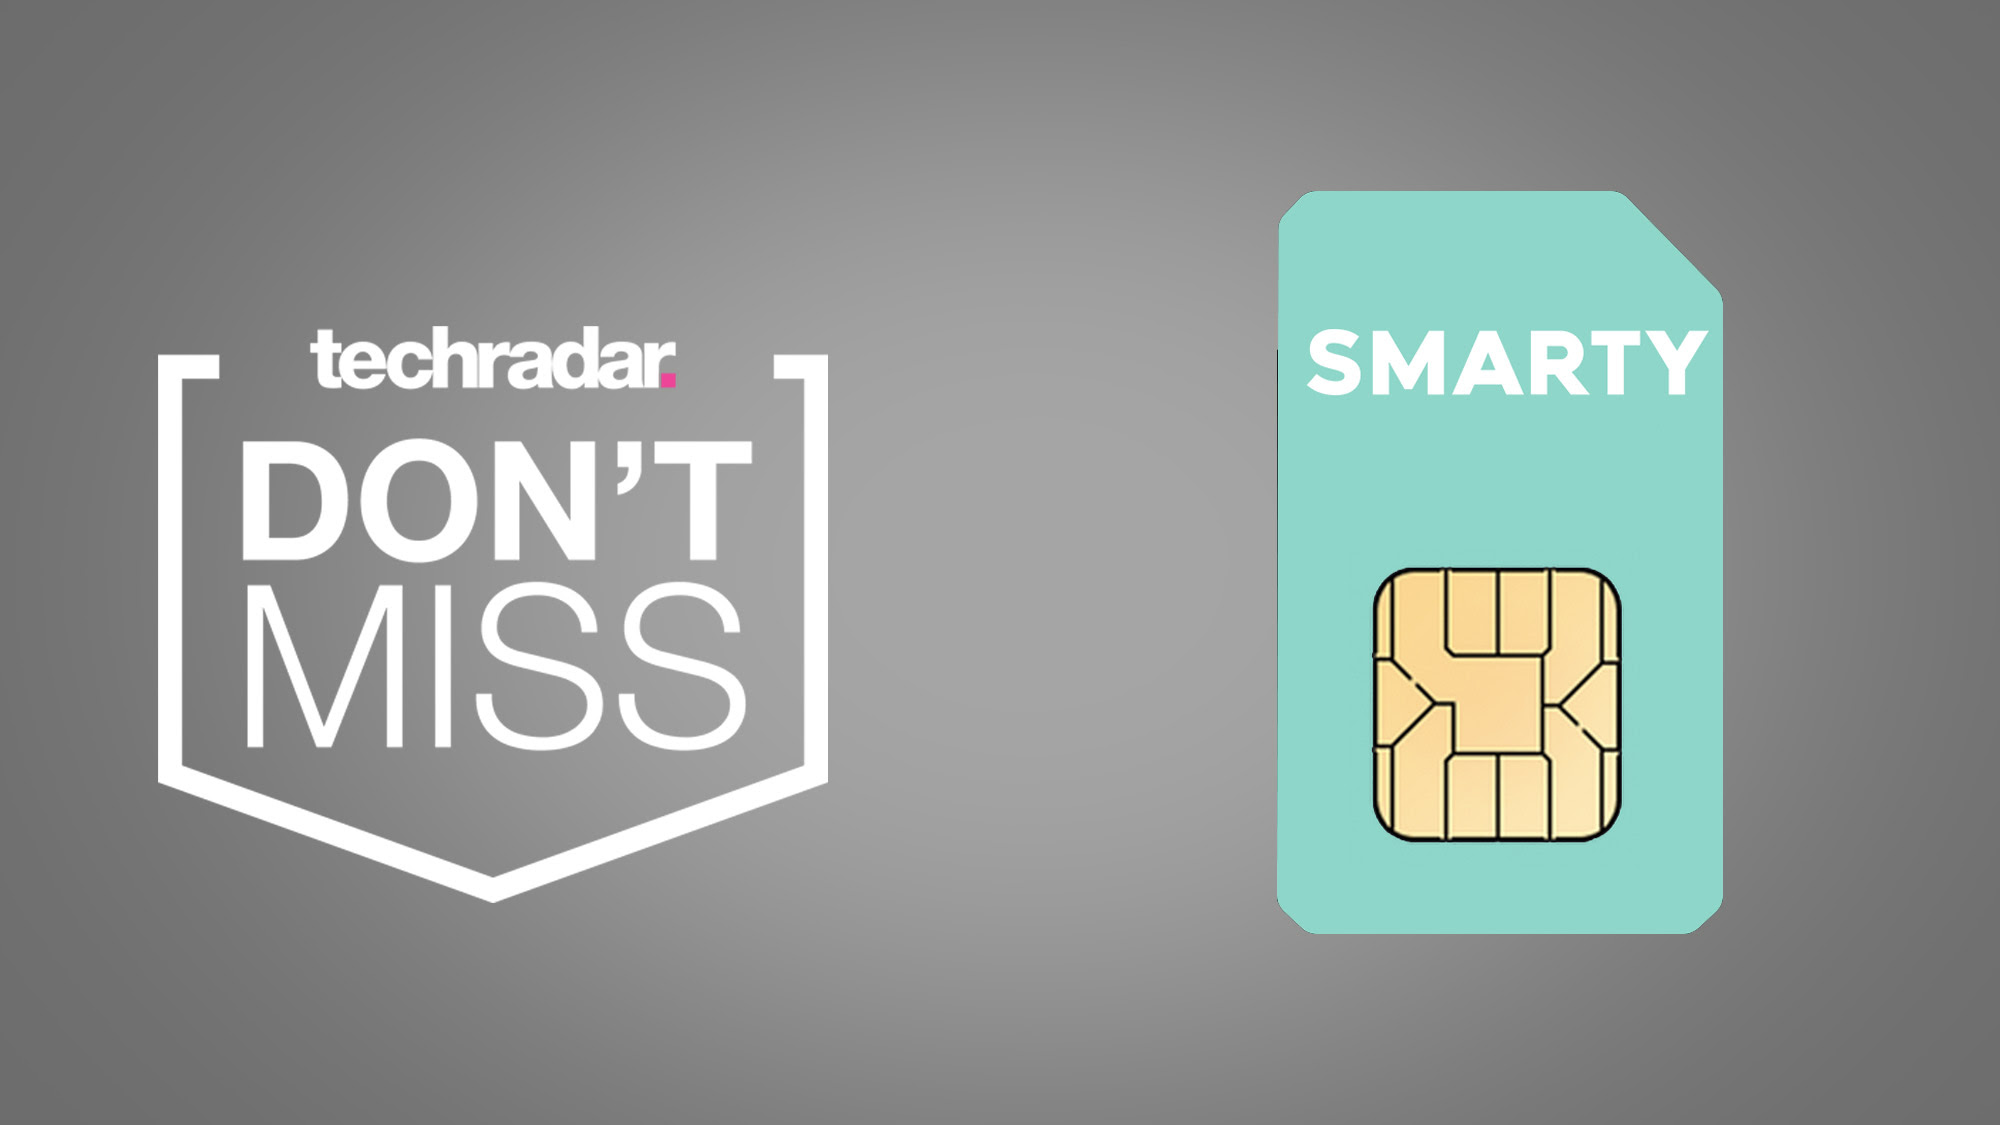 SIM-only deals don't get better than this cheap double-data offer at Smarty